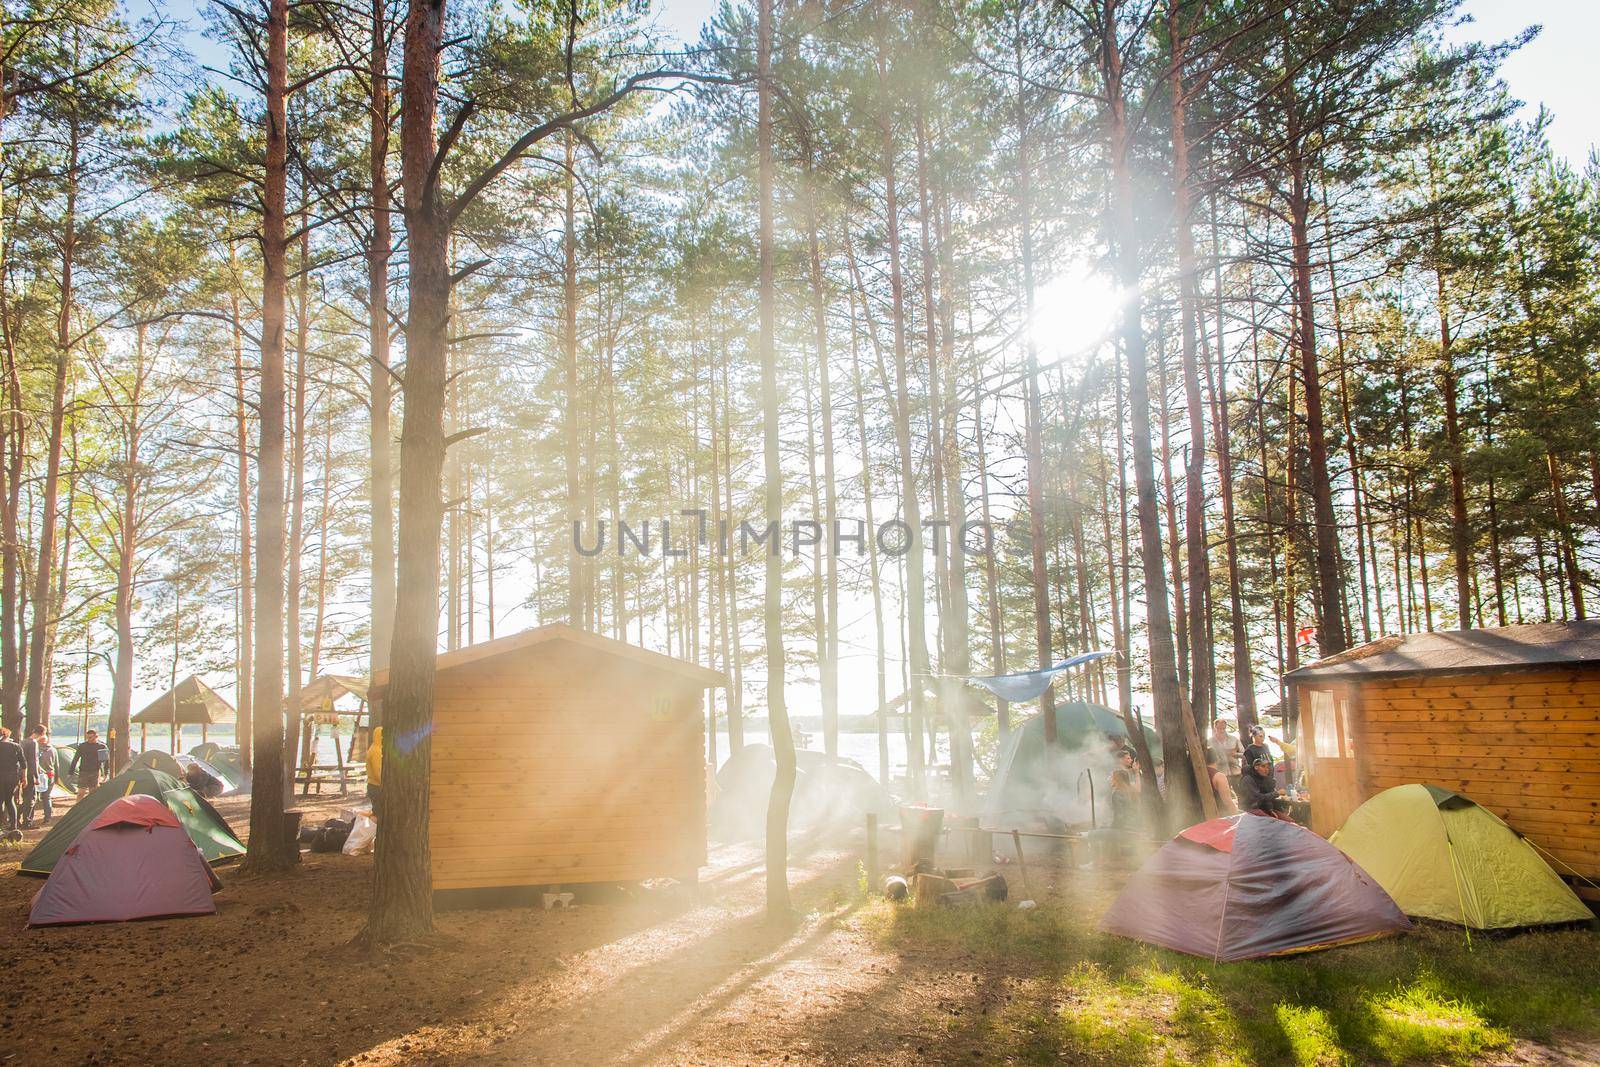 Belarus, Minsk region - June 29, 2019: Camp in the forest outdoor, travel and vacation in tents, camping lifestyle.